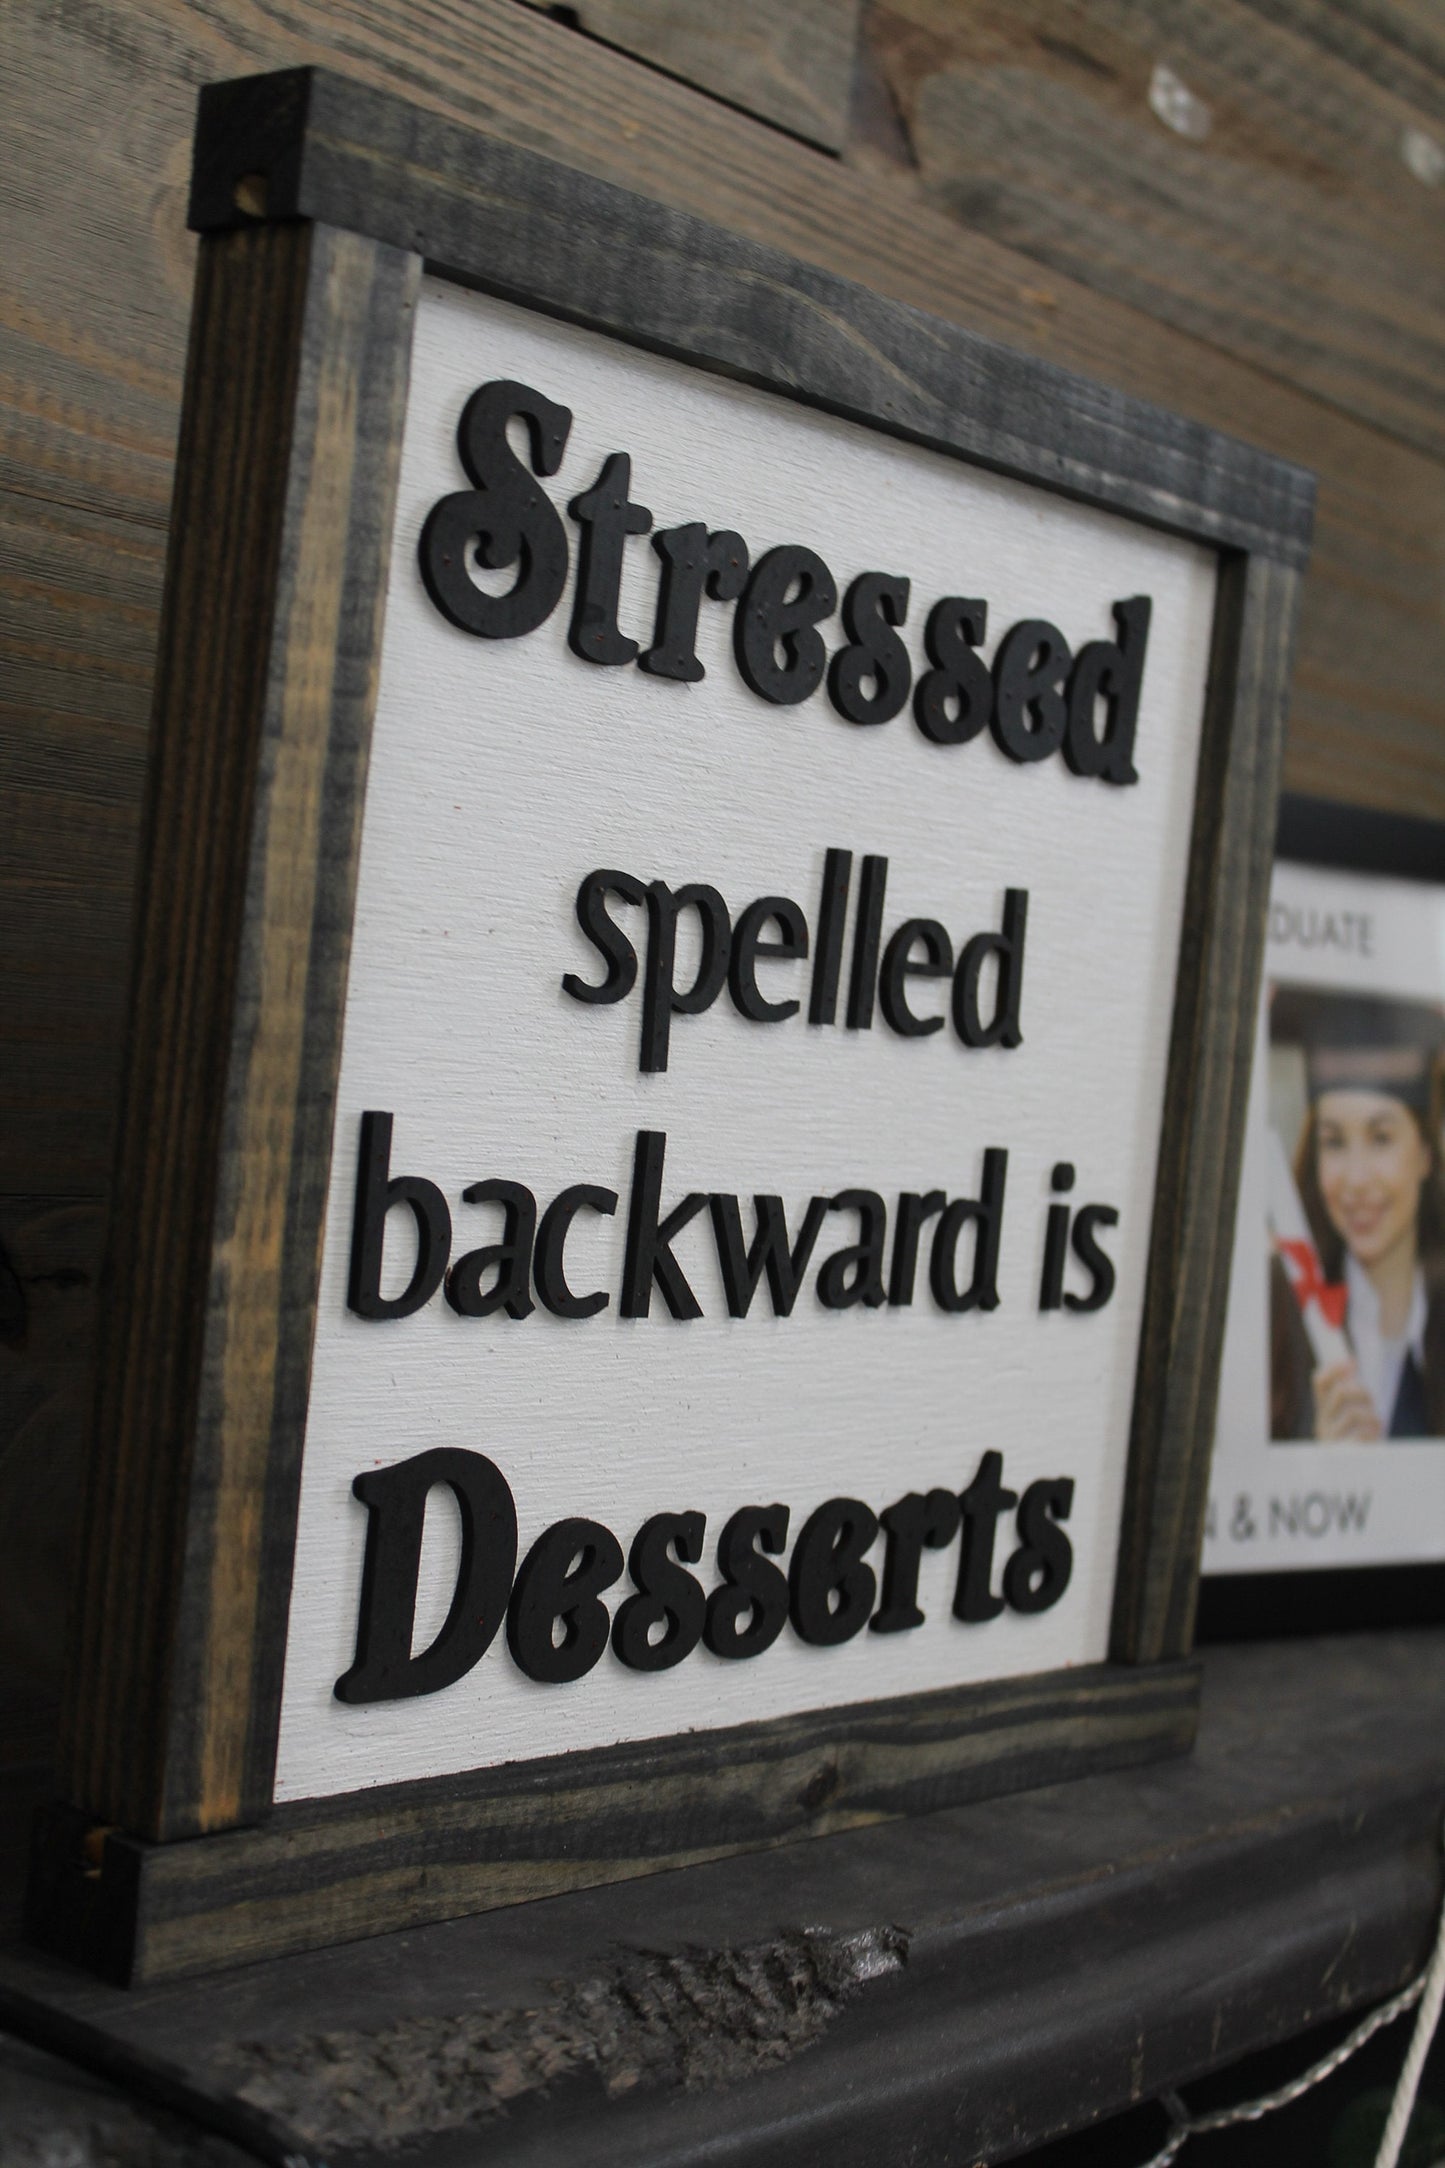 Stressed Humor Desserts Spelled Backwards Funny Bakery Baking Foodie Handmade Decor Home Decor Kitchen Wooden Raised Sign Lifted Framed